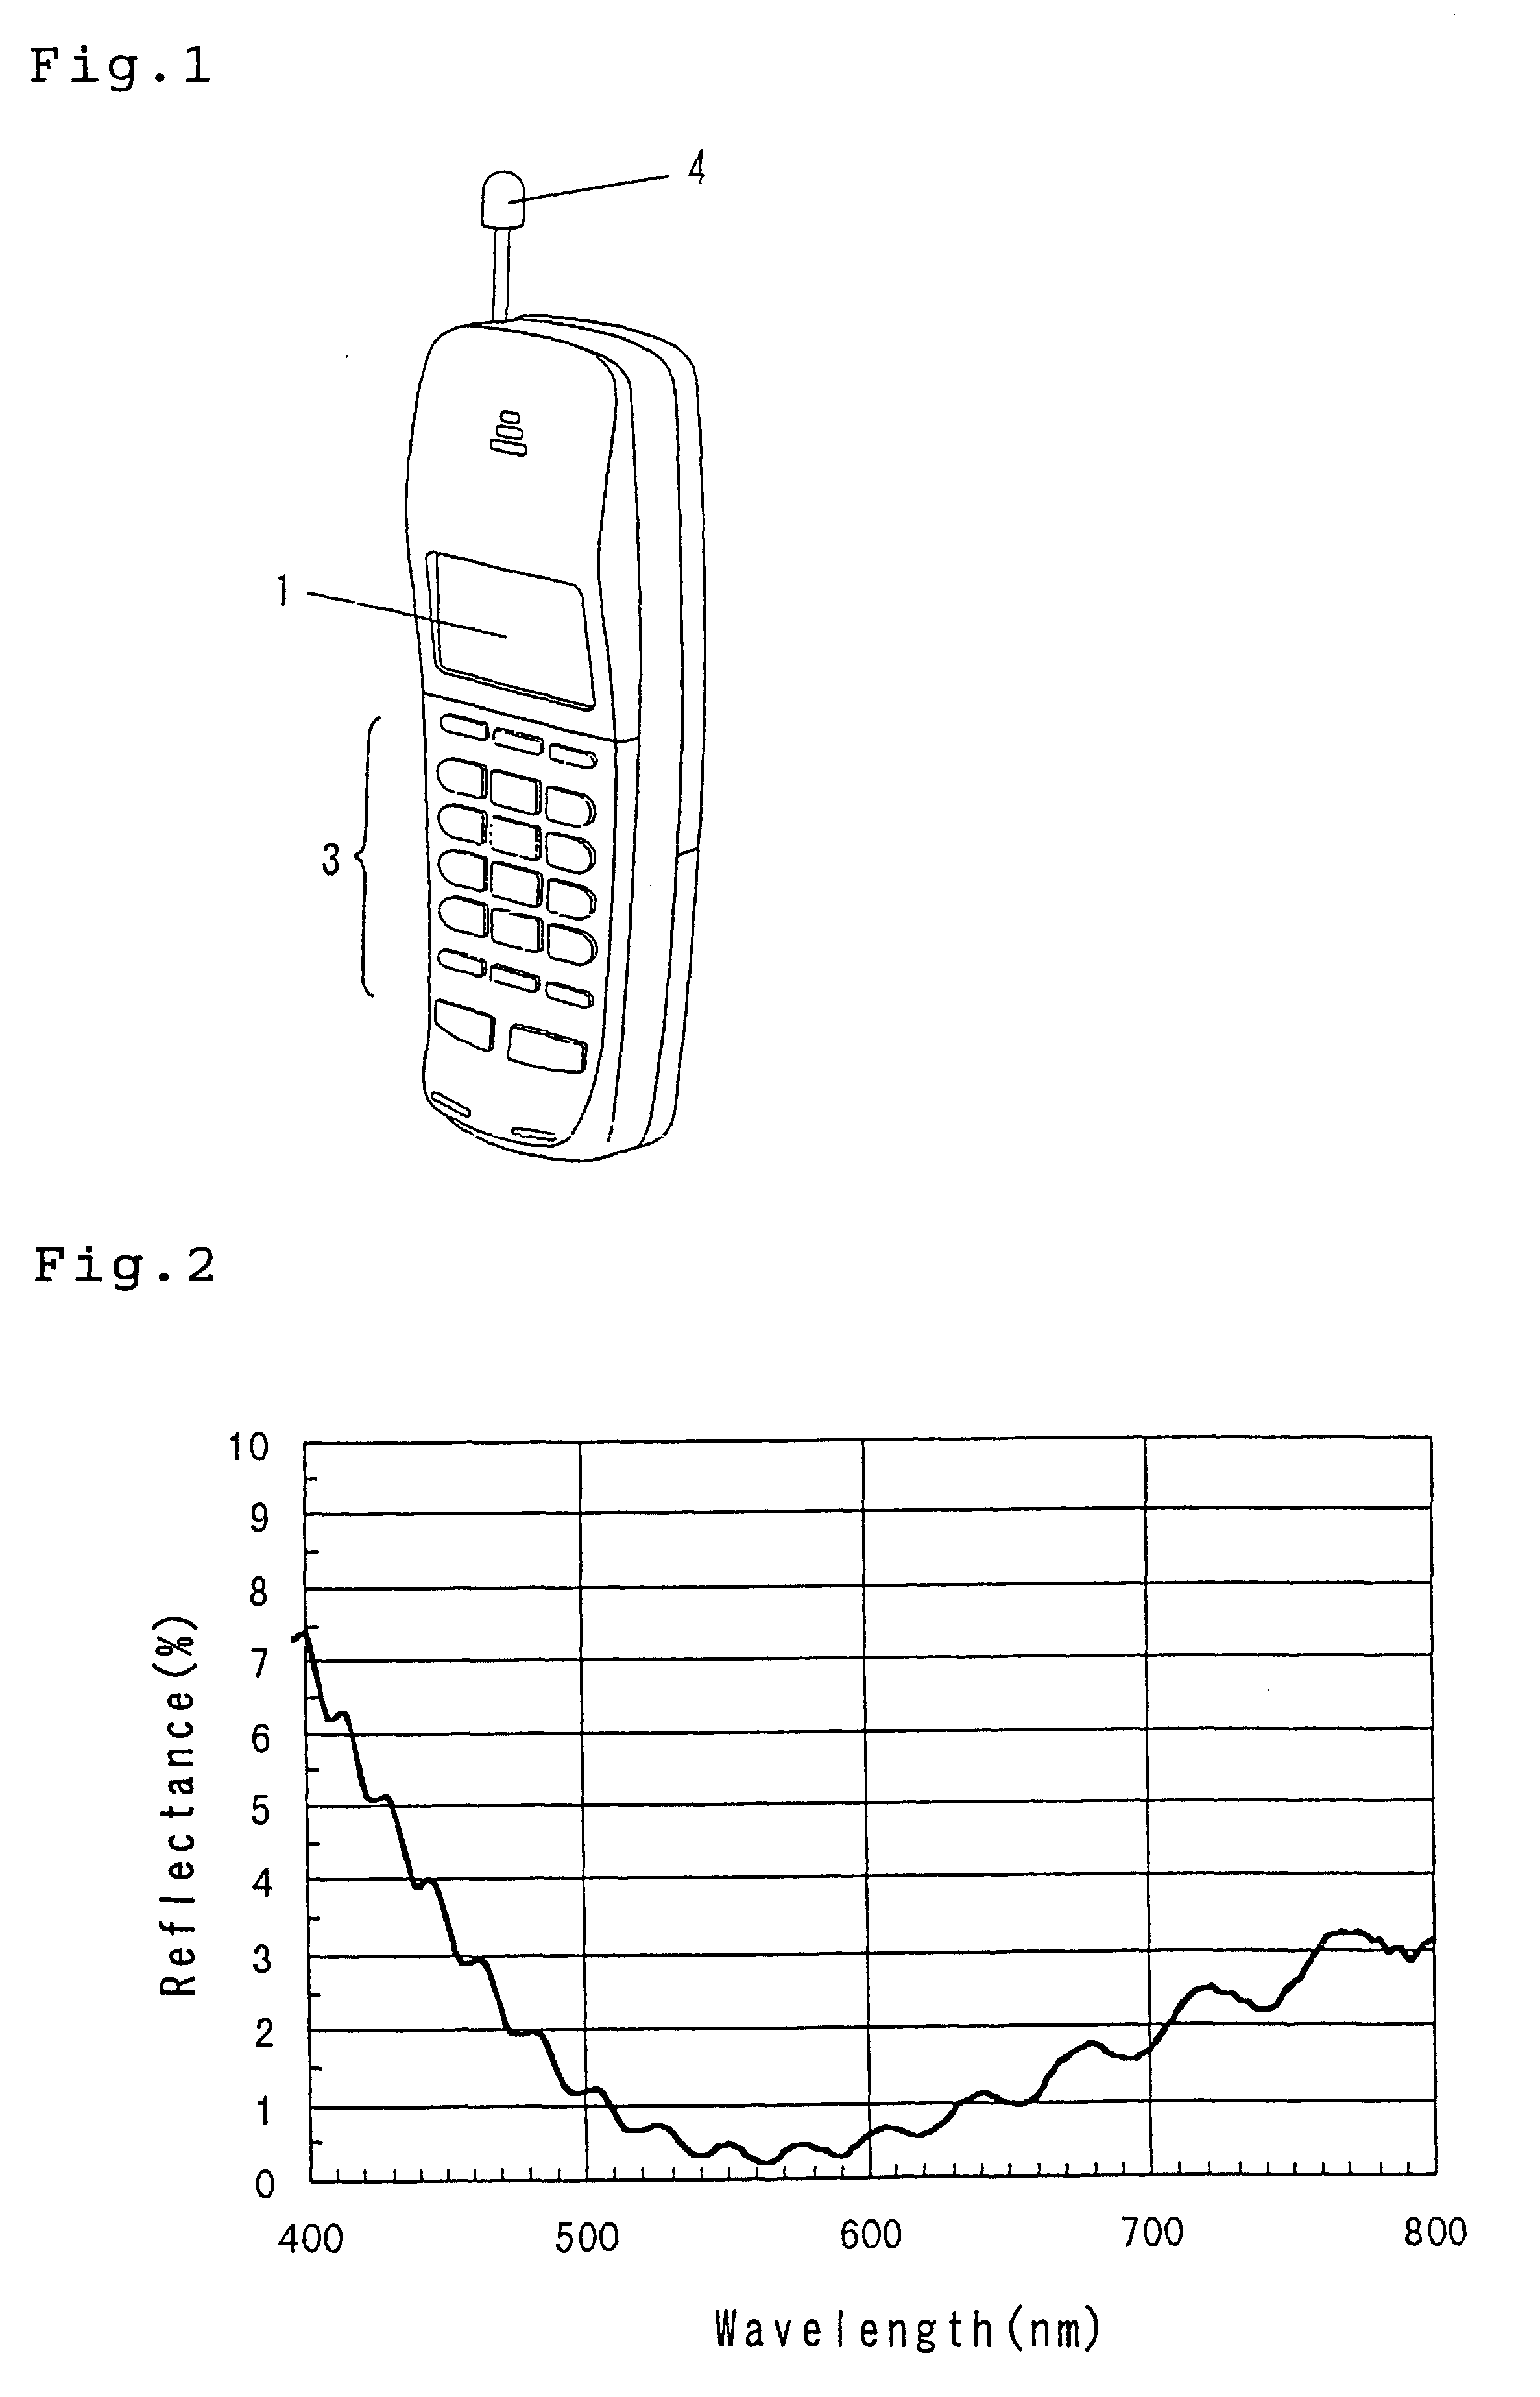 Front panel with an anti-reflection layer having particular compositions